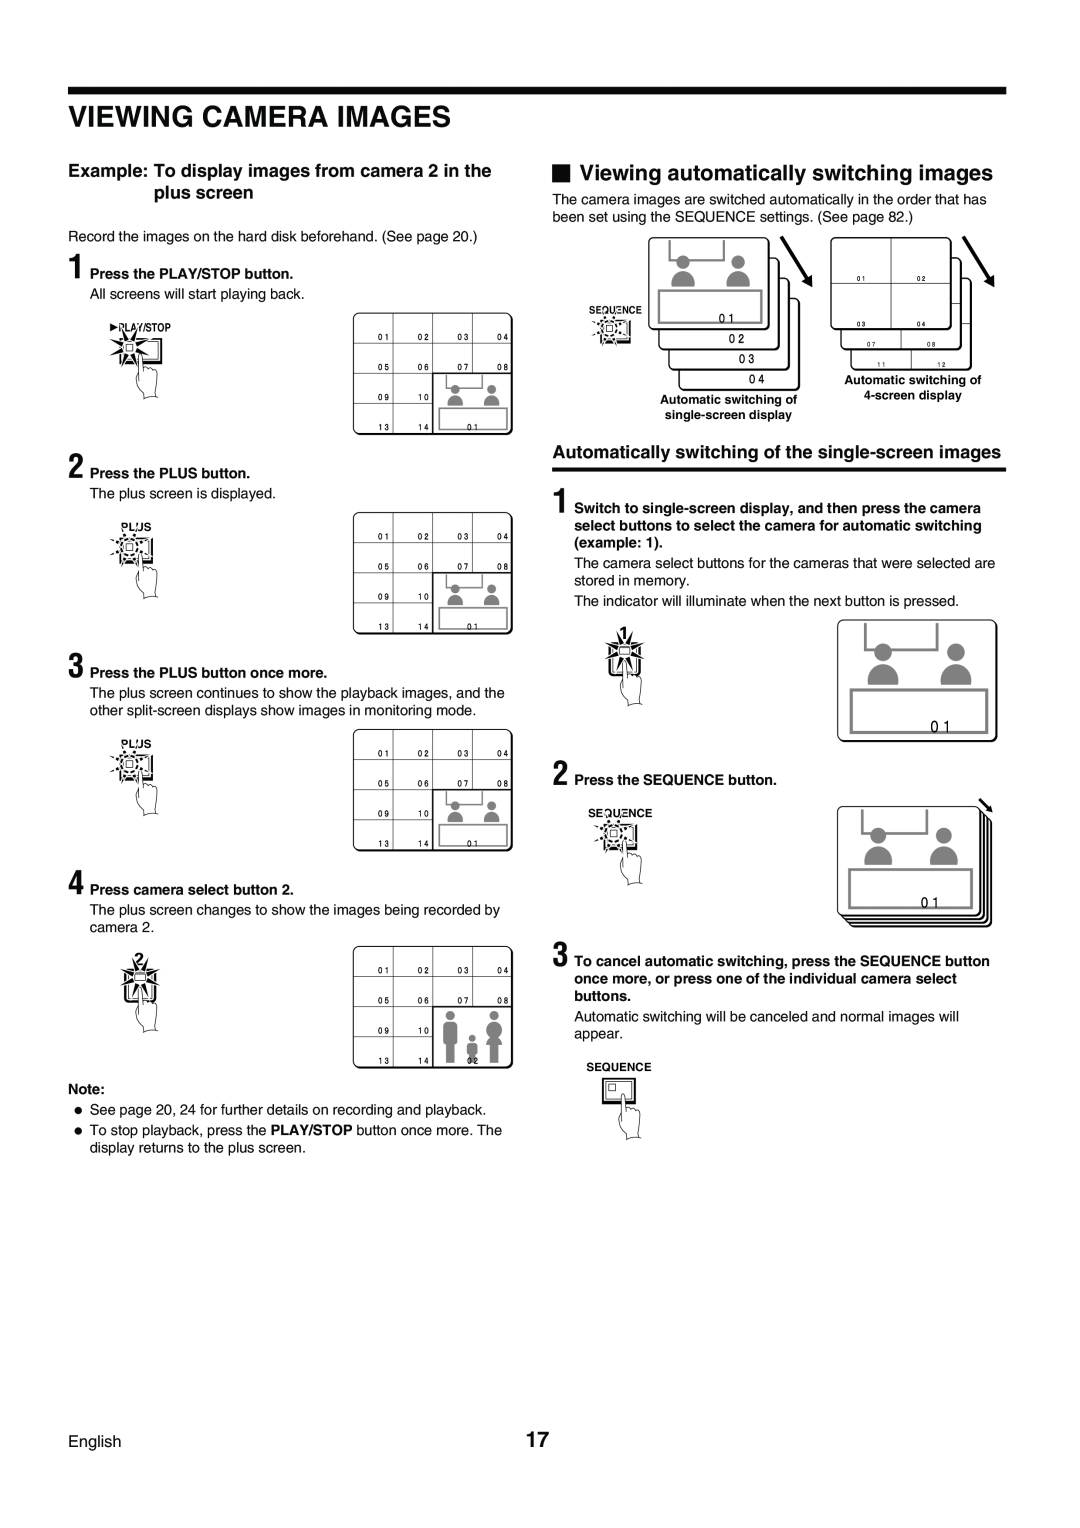 Sanyo DSR-3009P instruction manual Viewing automatically switching images, Viewing Camera Images 